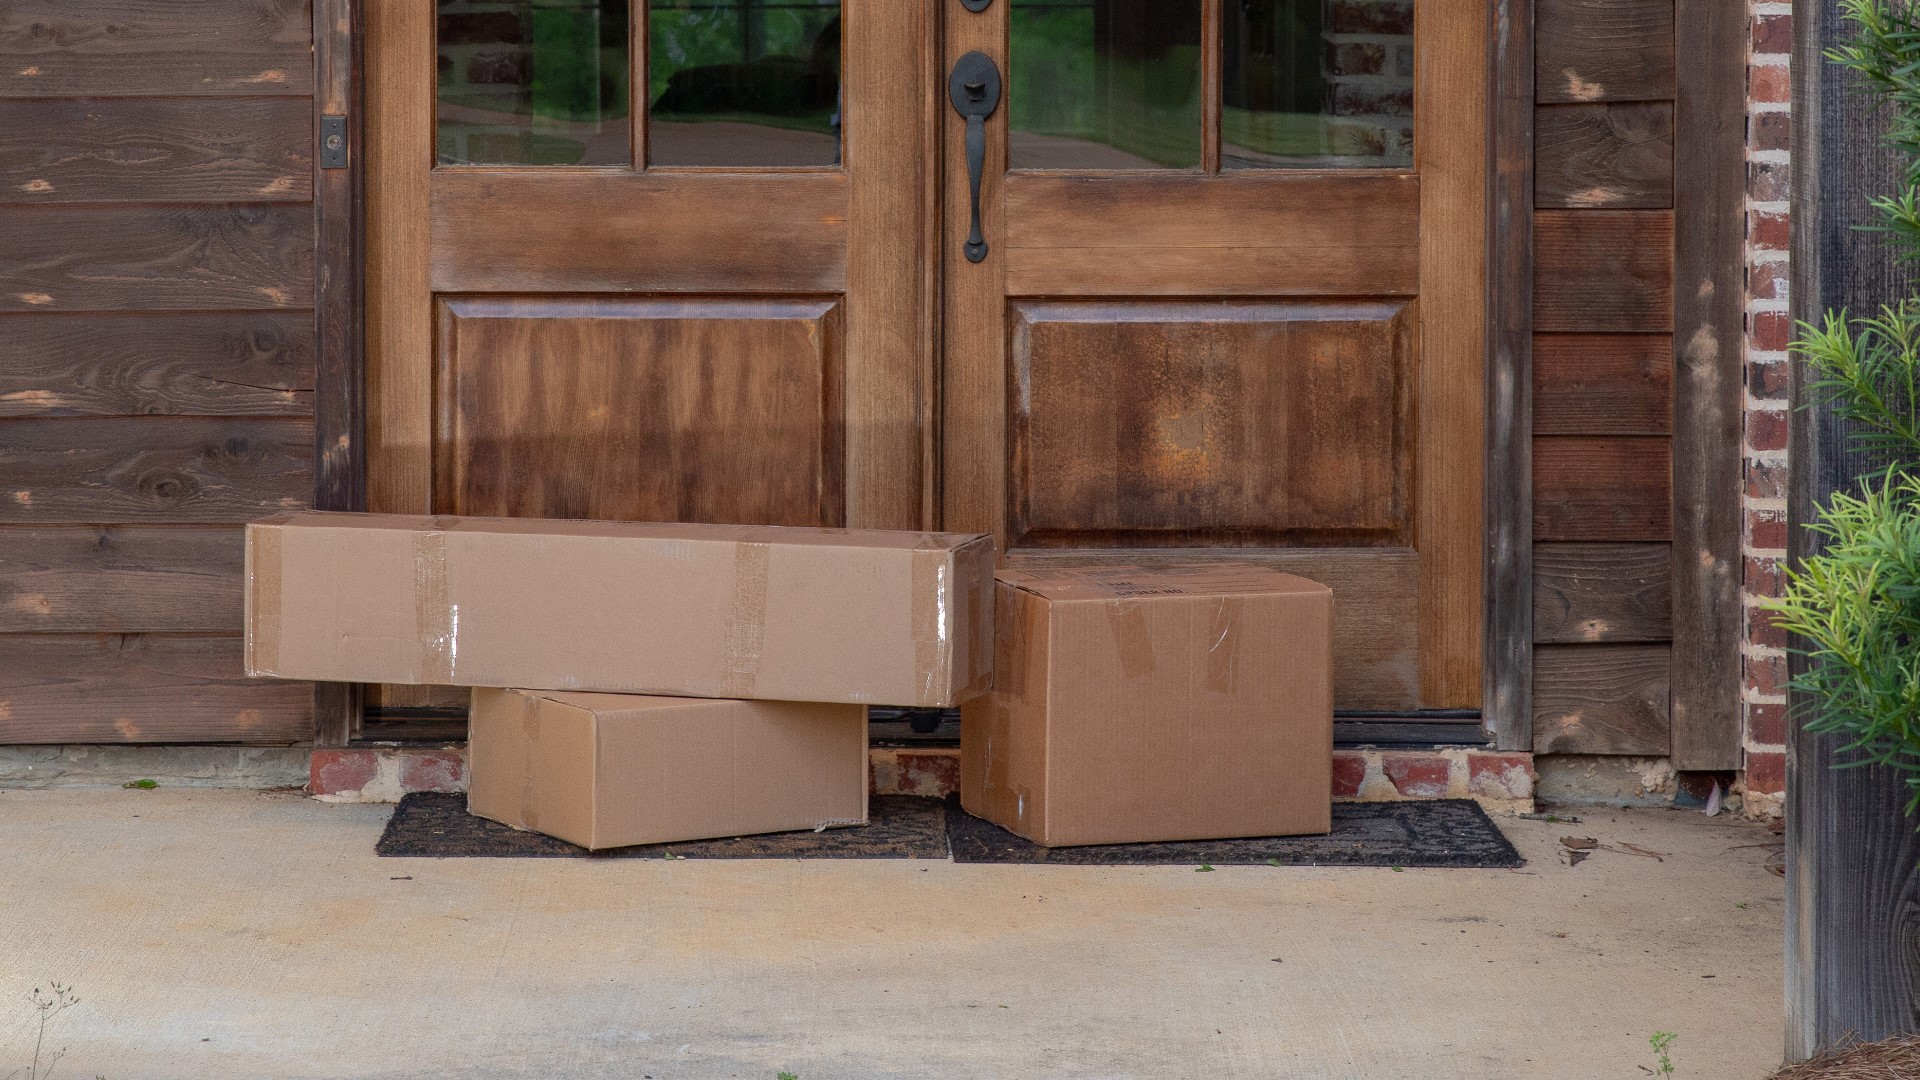 13 ON YOUR SIDE's Angela Cunningham has all the tips to protect your holiday shopping packages from getting pilfered by porch pirates.